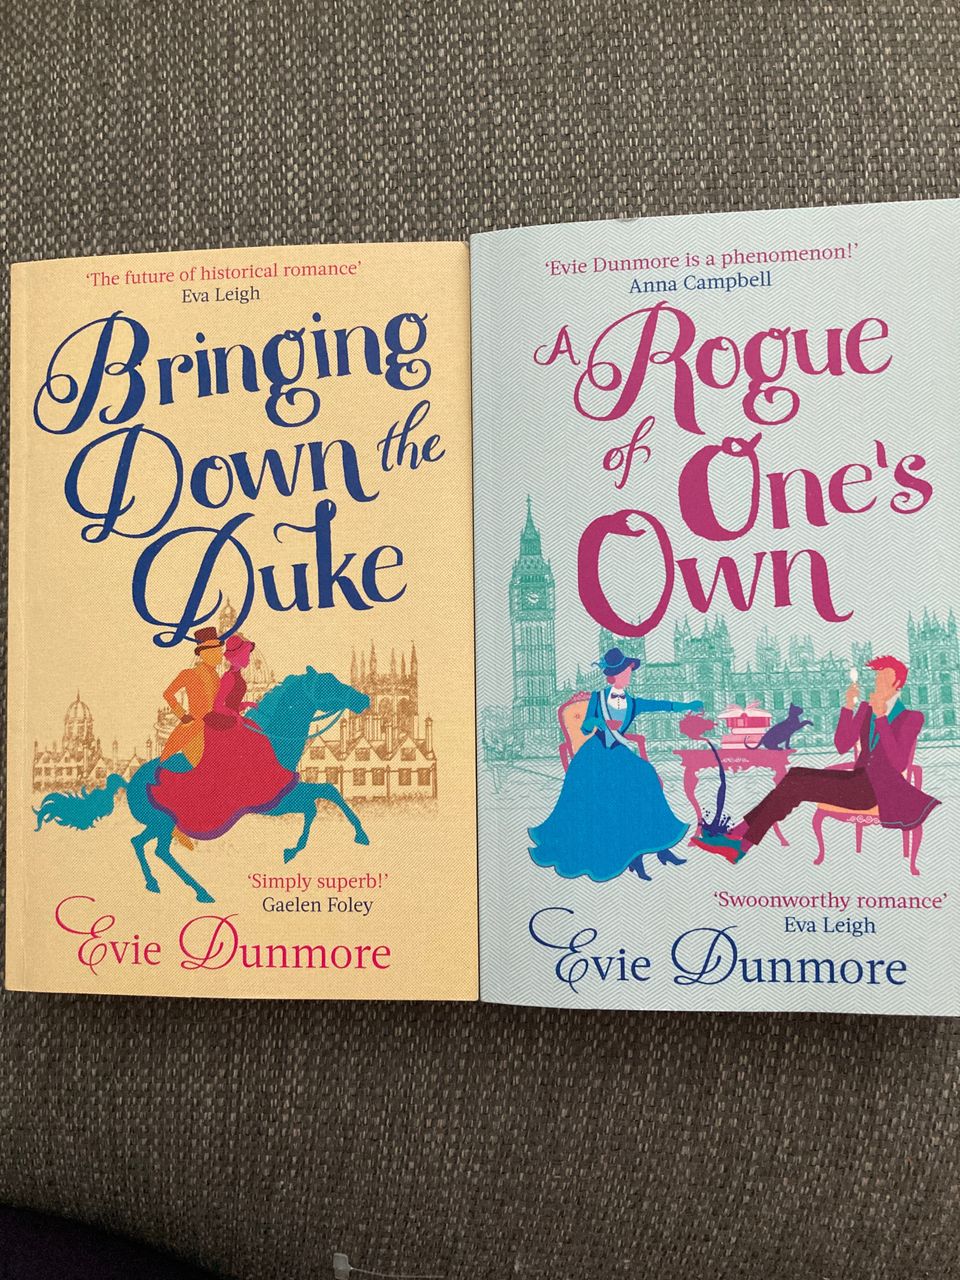 Evie Dunmore - Bringing Down the Duke & A Rogue of One’s Own